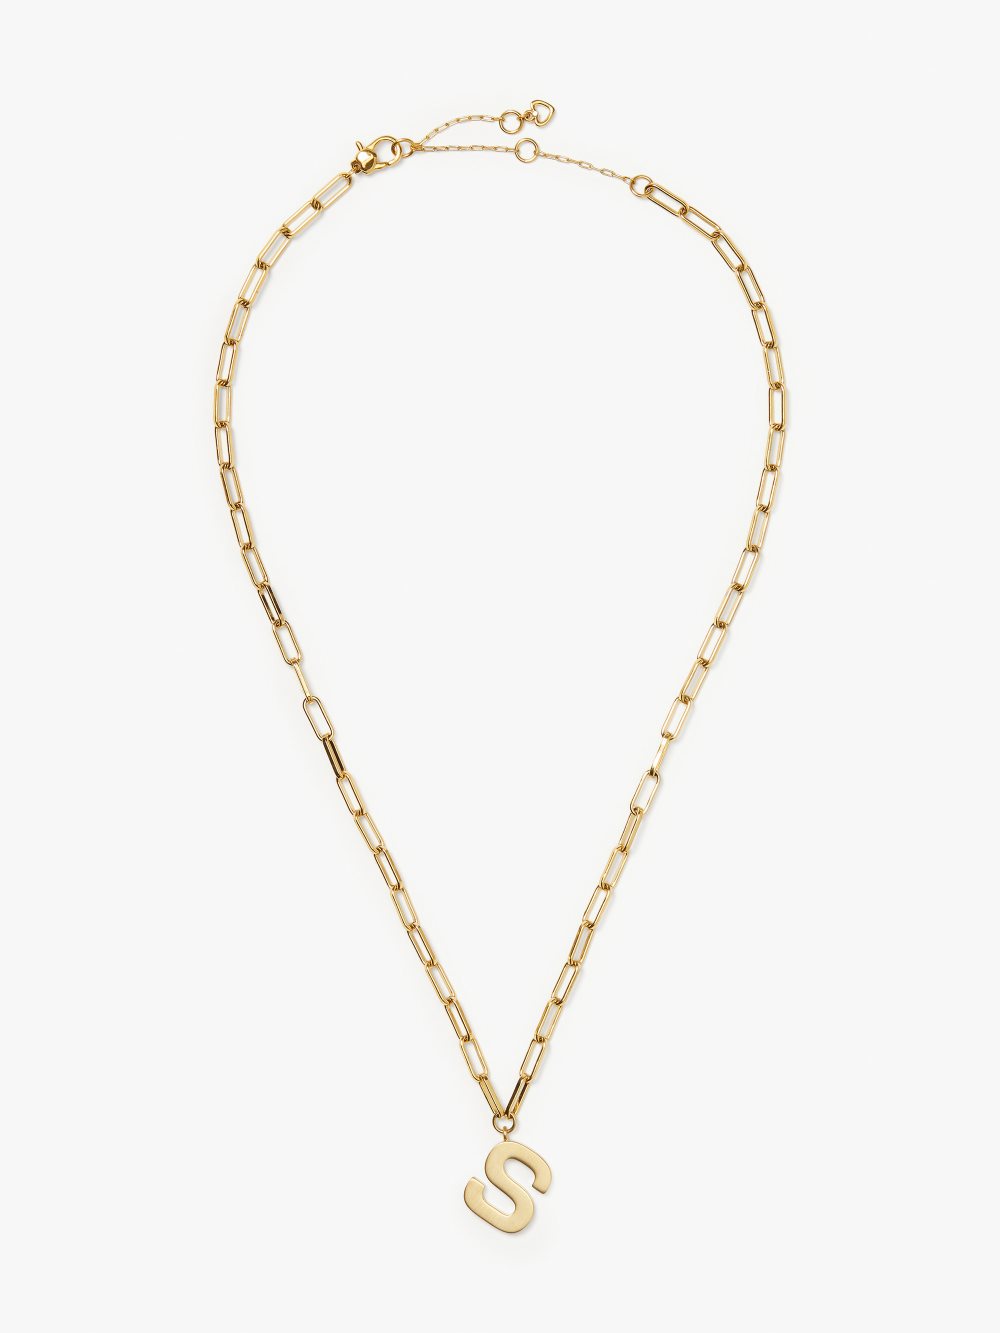 Women's gold. s initial this pendant | Kate Spade